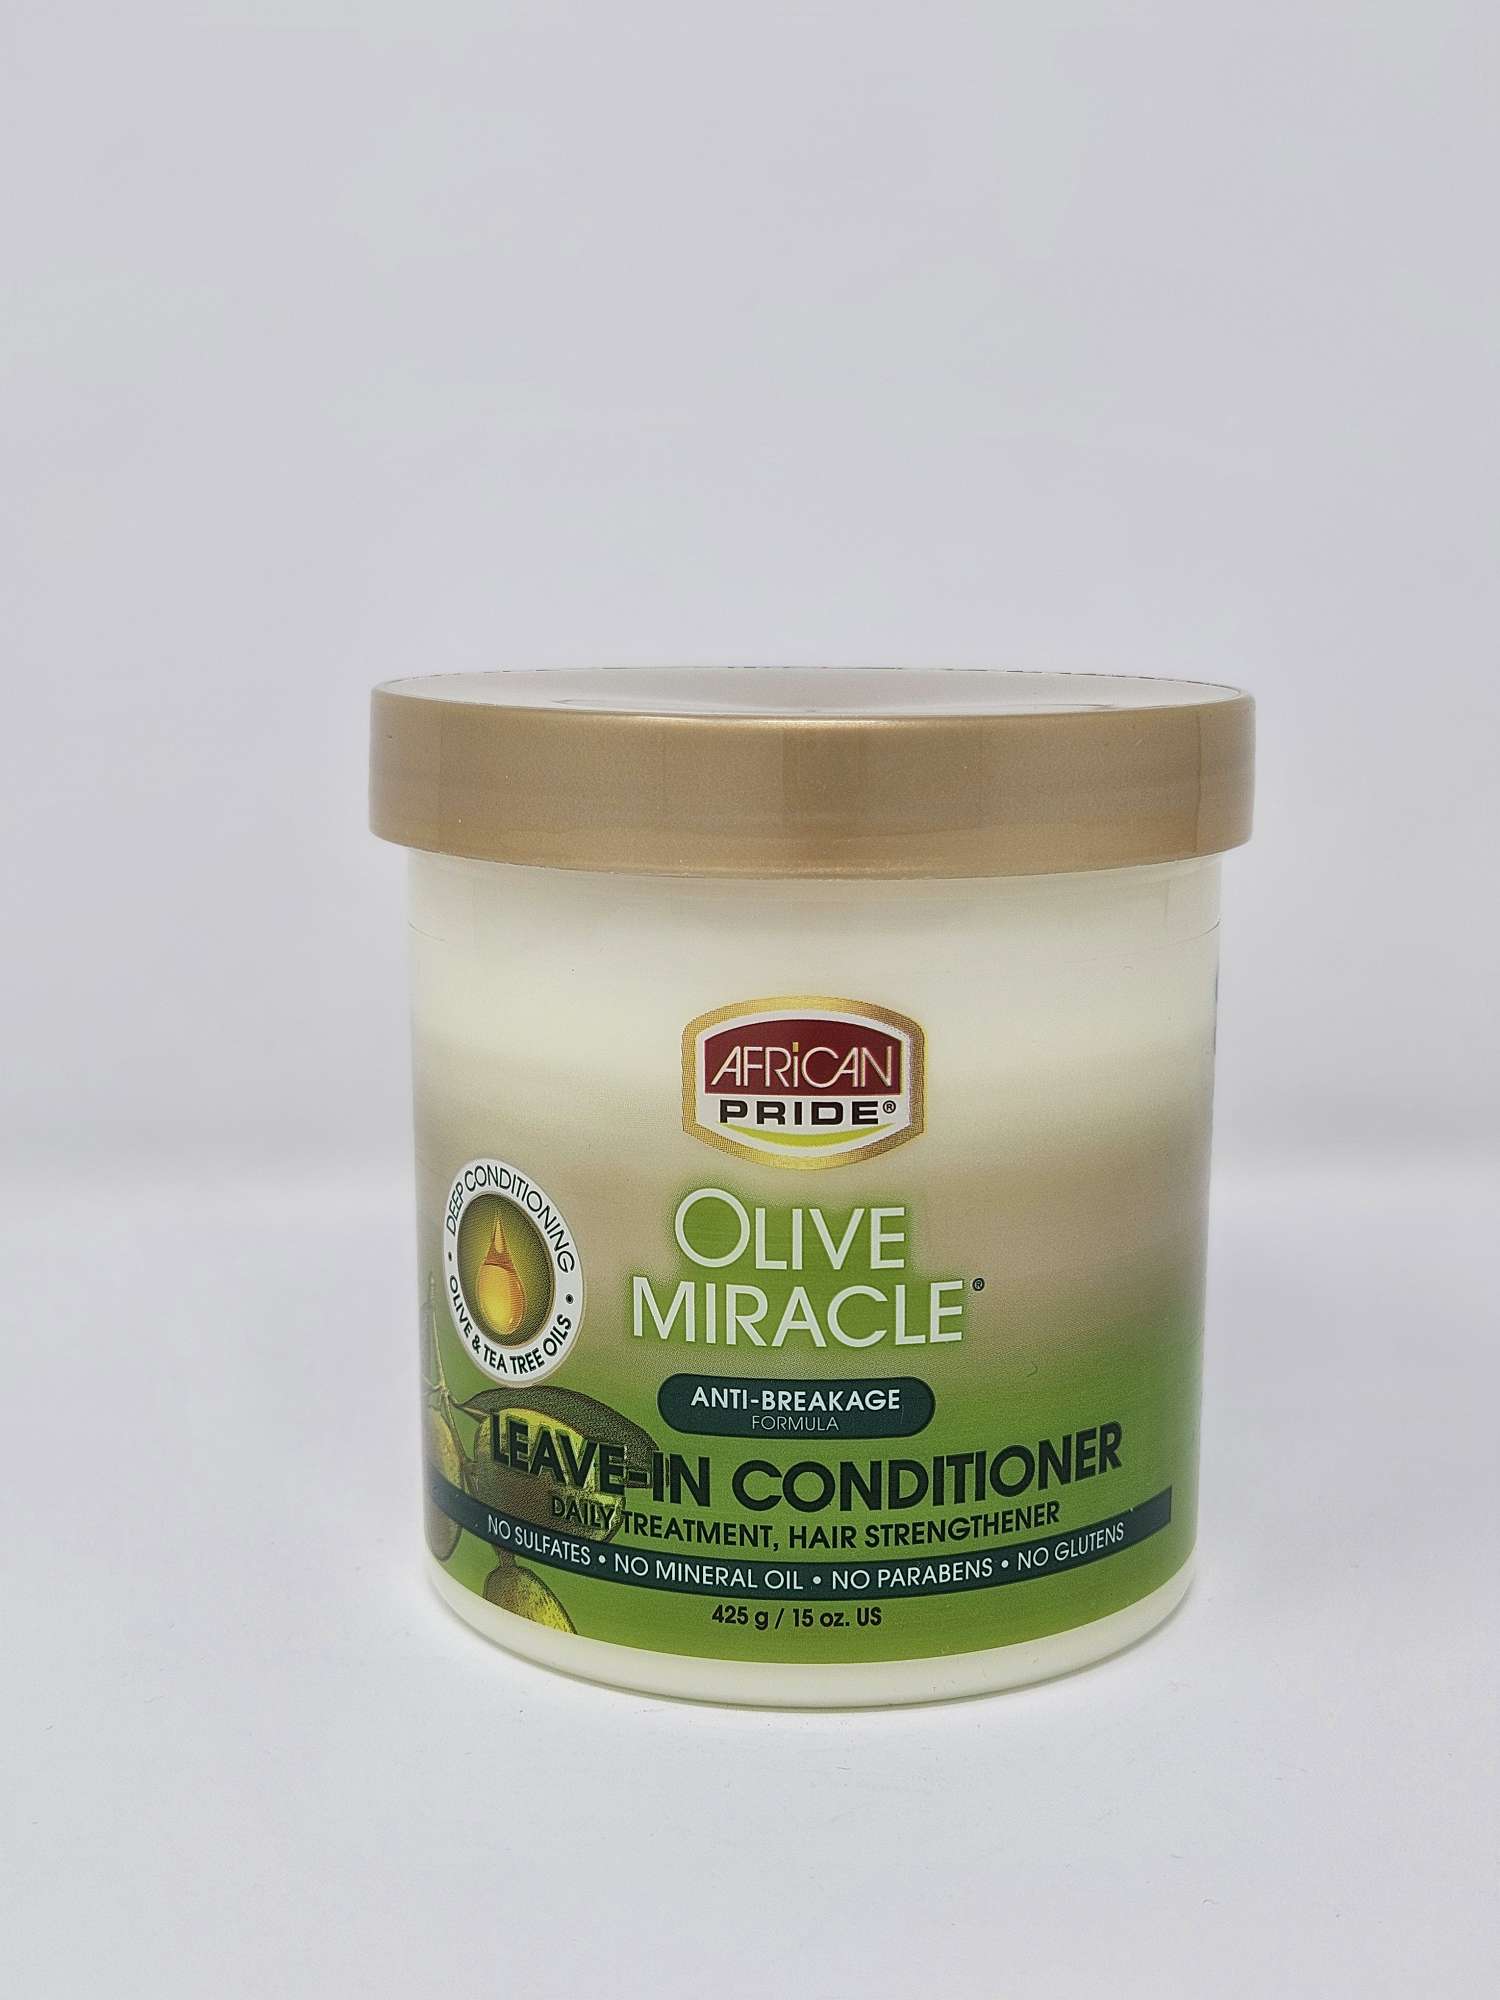 African Pride Olive Miracle Daily Treatment Hair Strengthener Leave-In Conditioner - 15oz